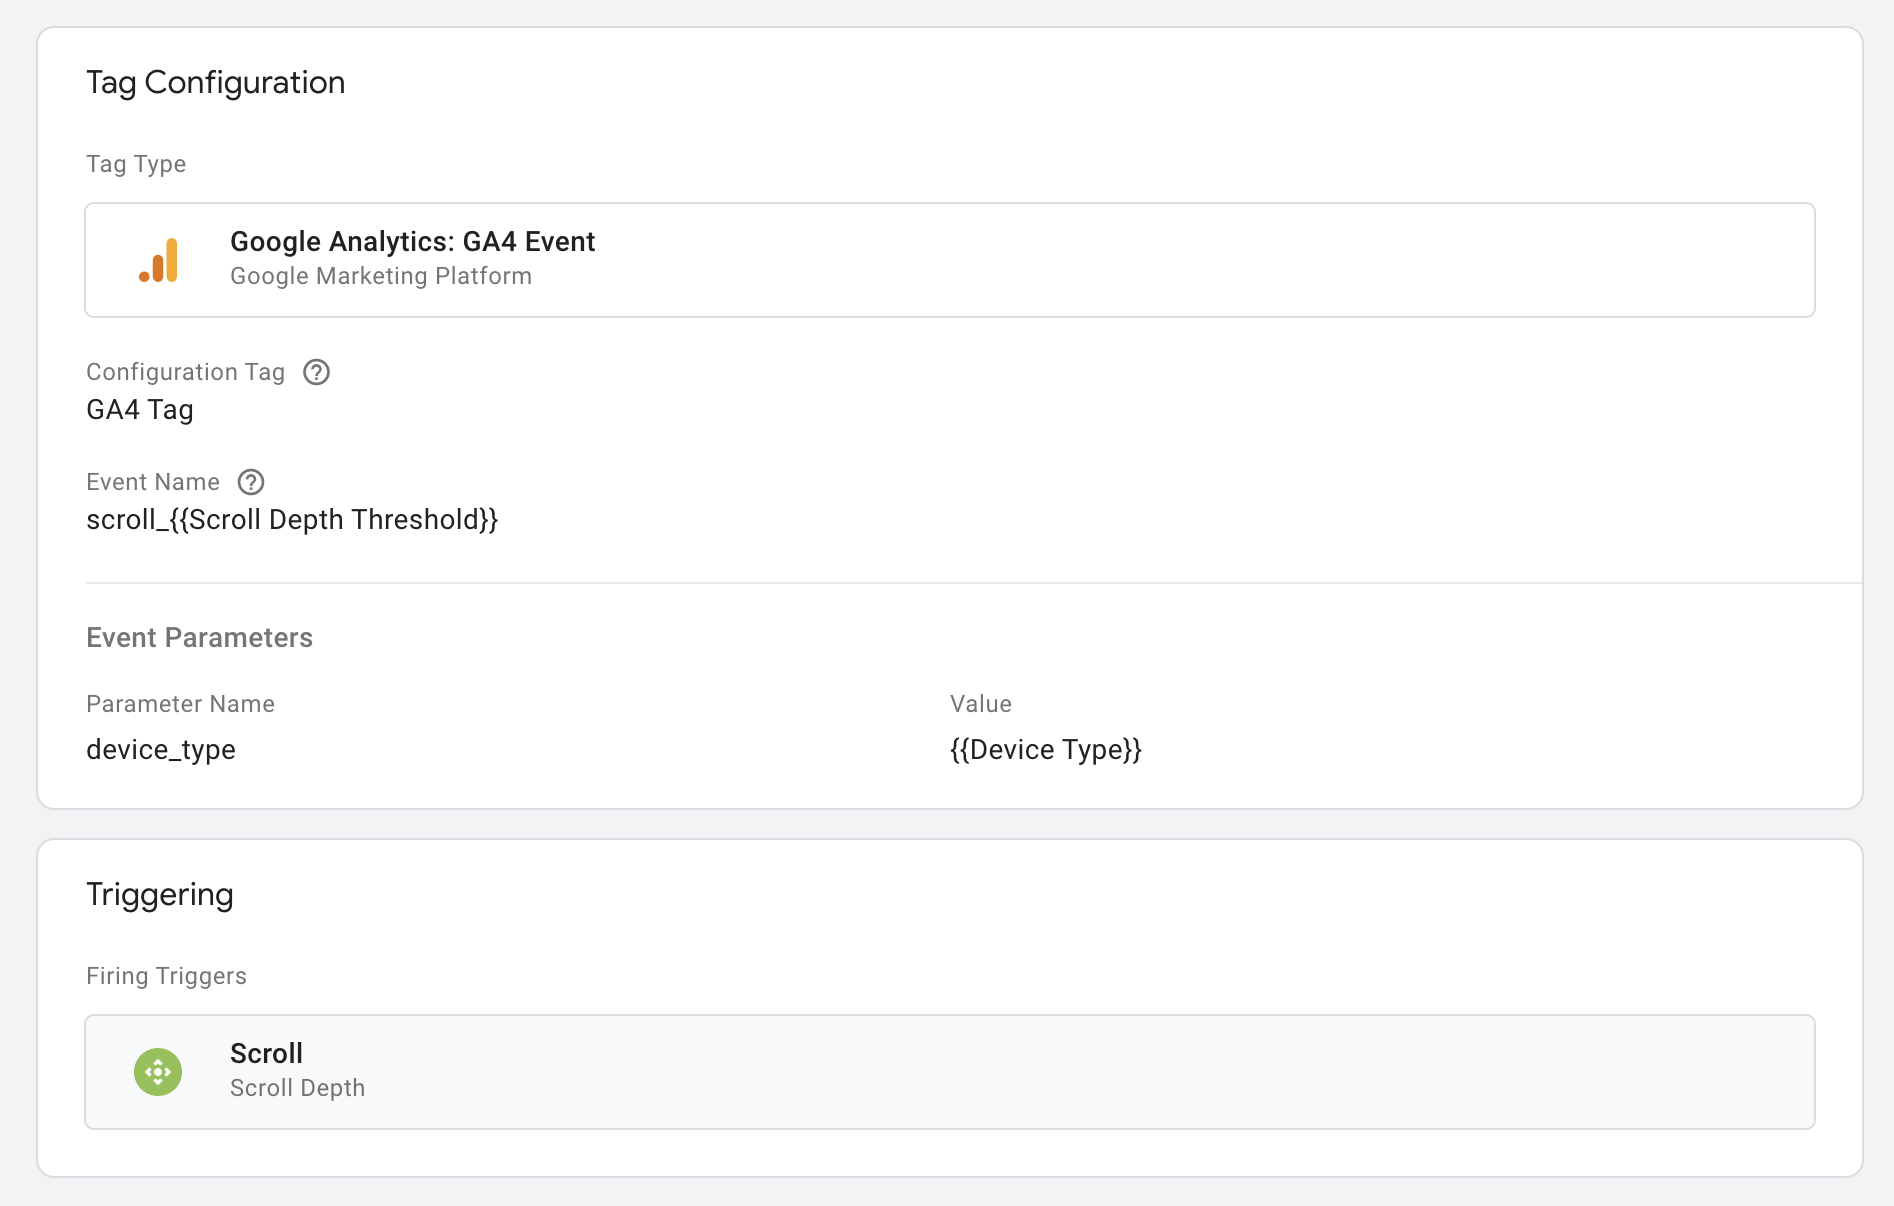 Configuring the scroll event tag in Google Tag Manager